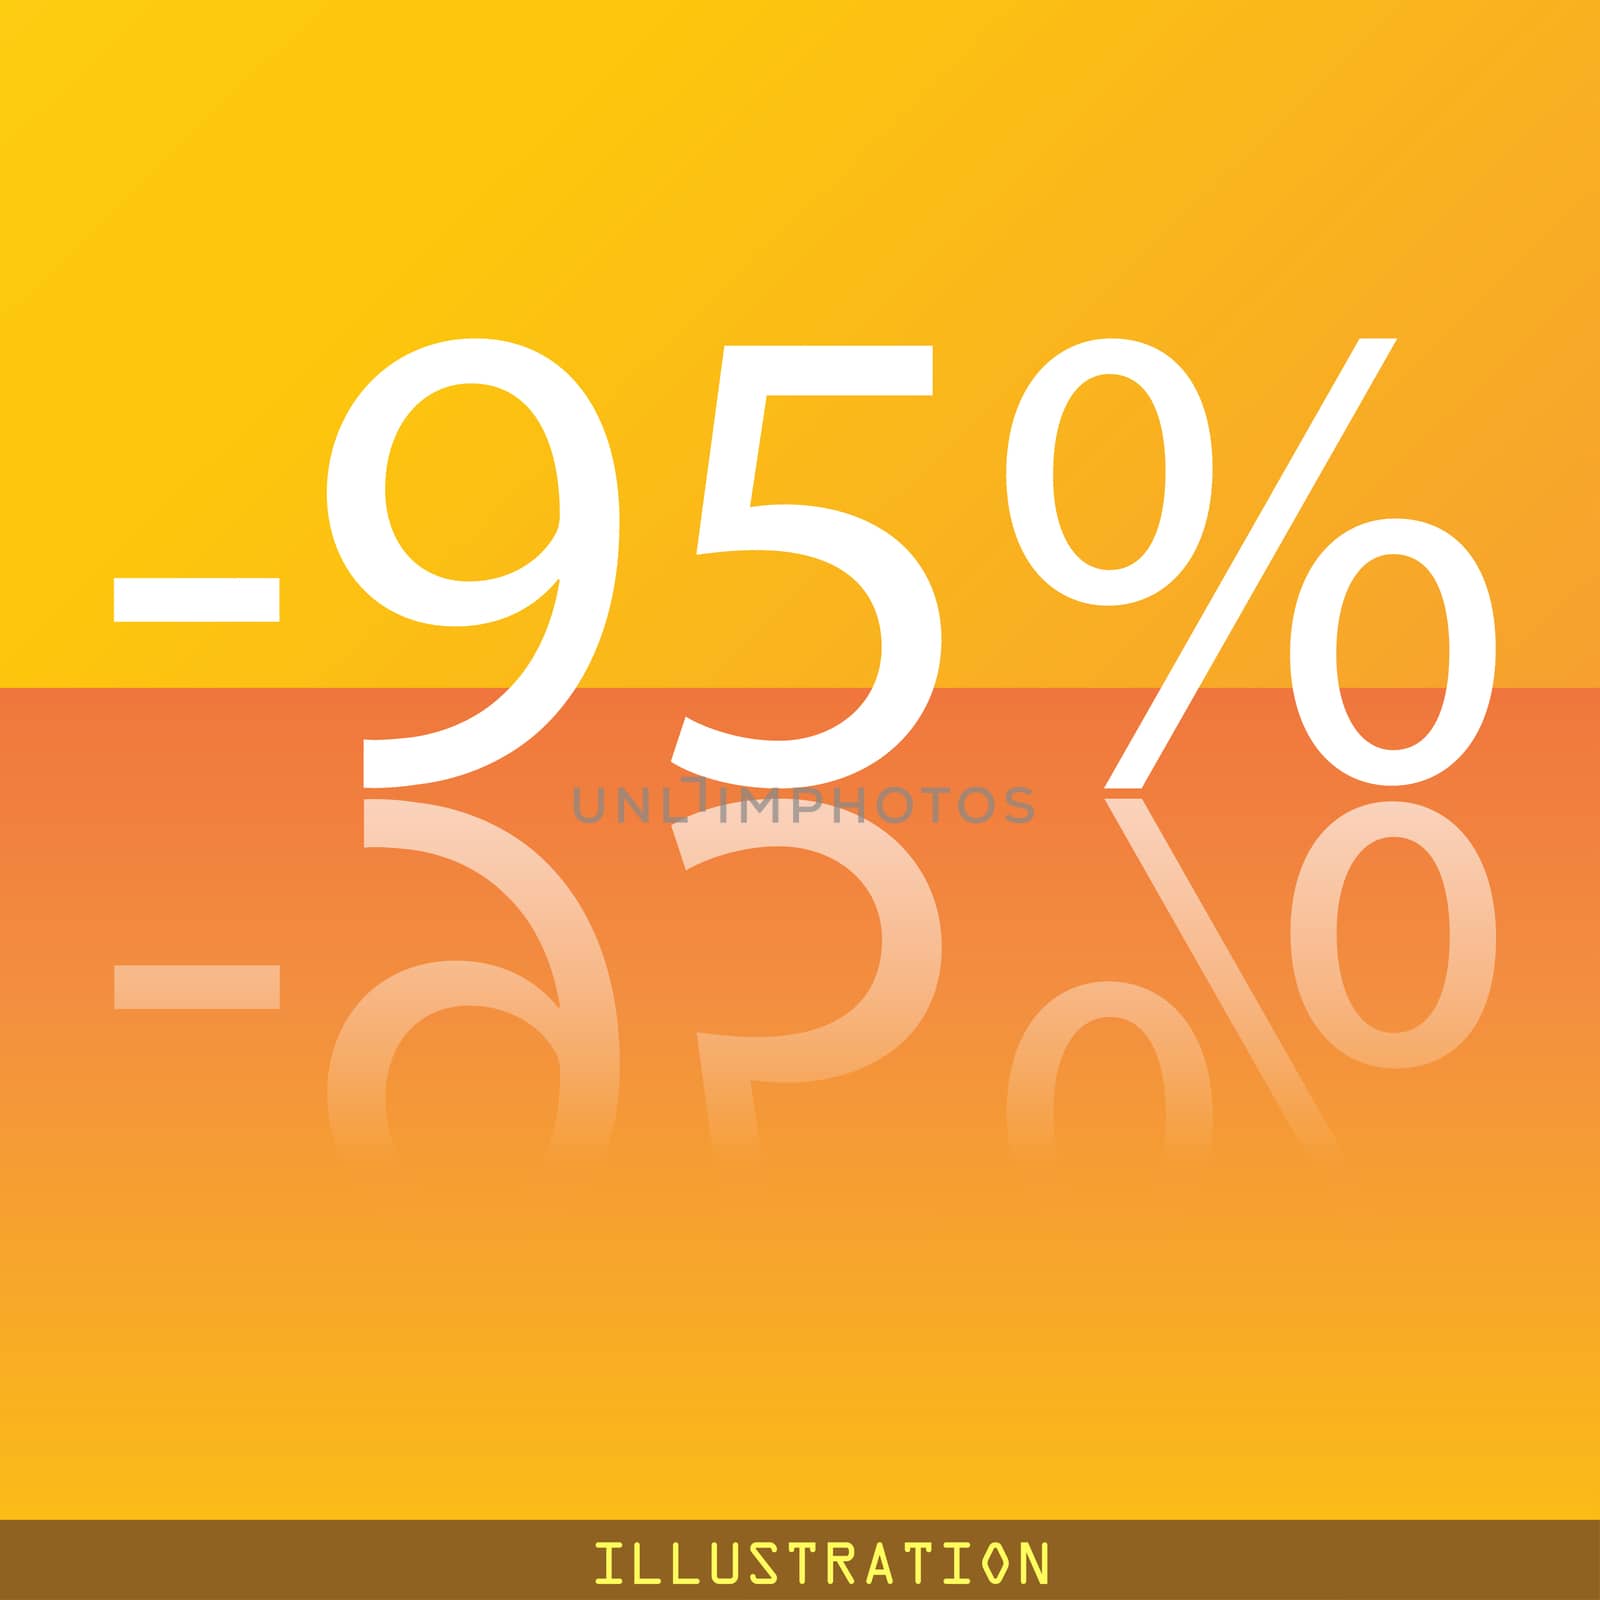 95 percent discount icon symbol Flat modern web design with reflection and space for your text. illustration. Raster version